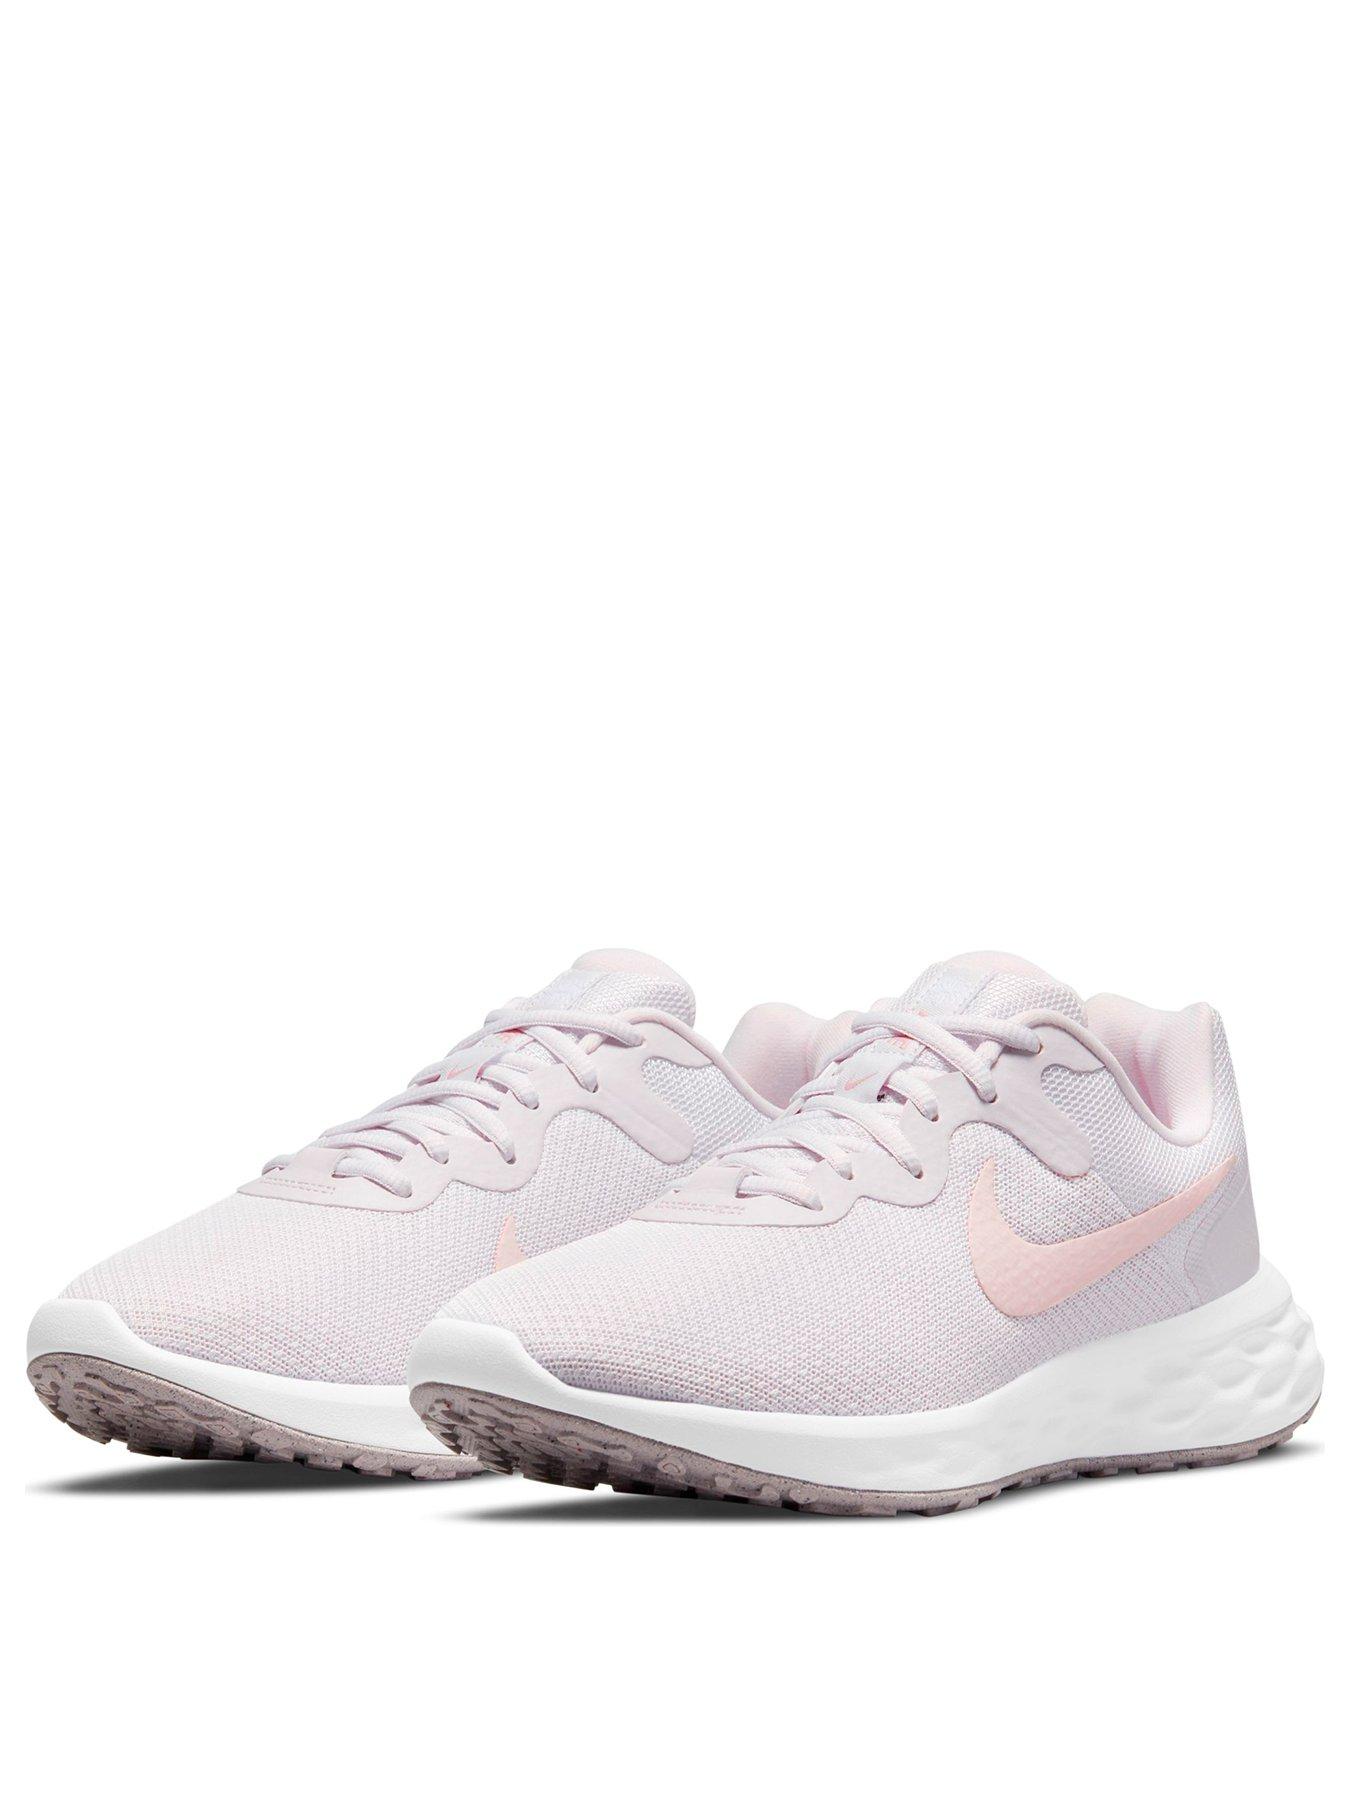 blush coloured trainers